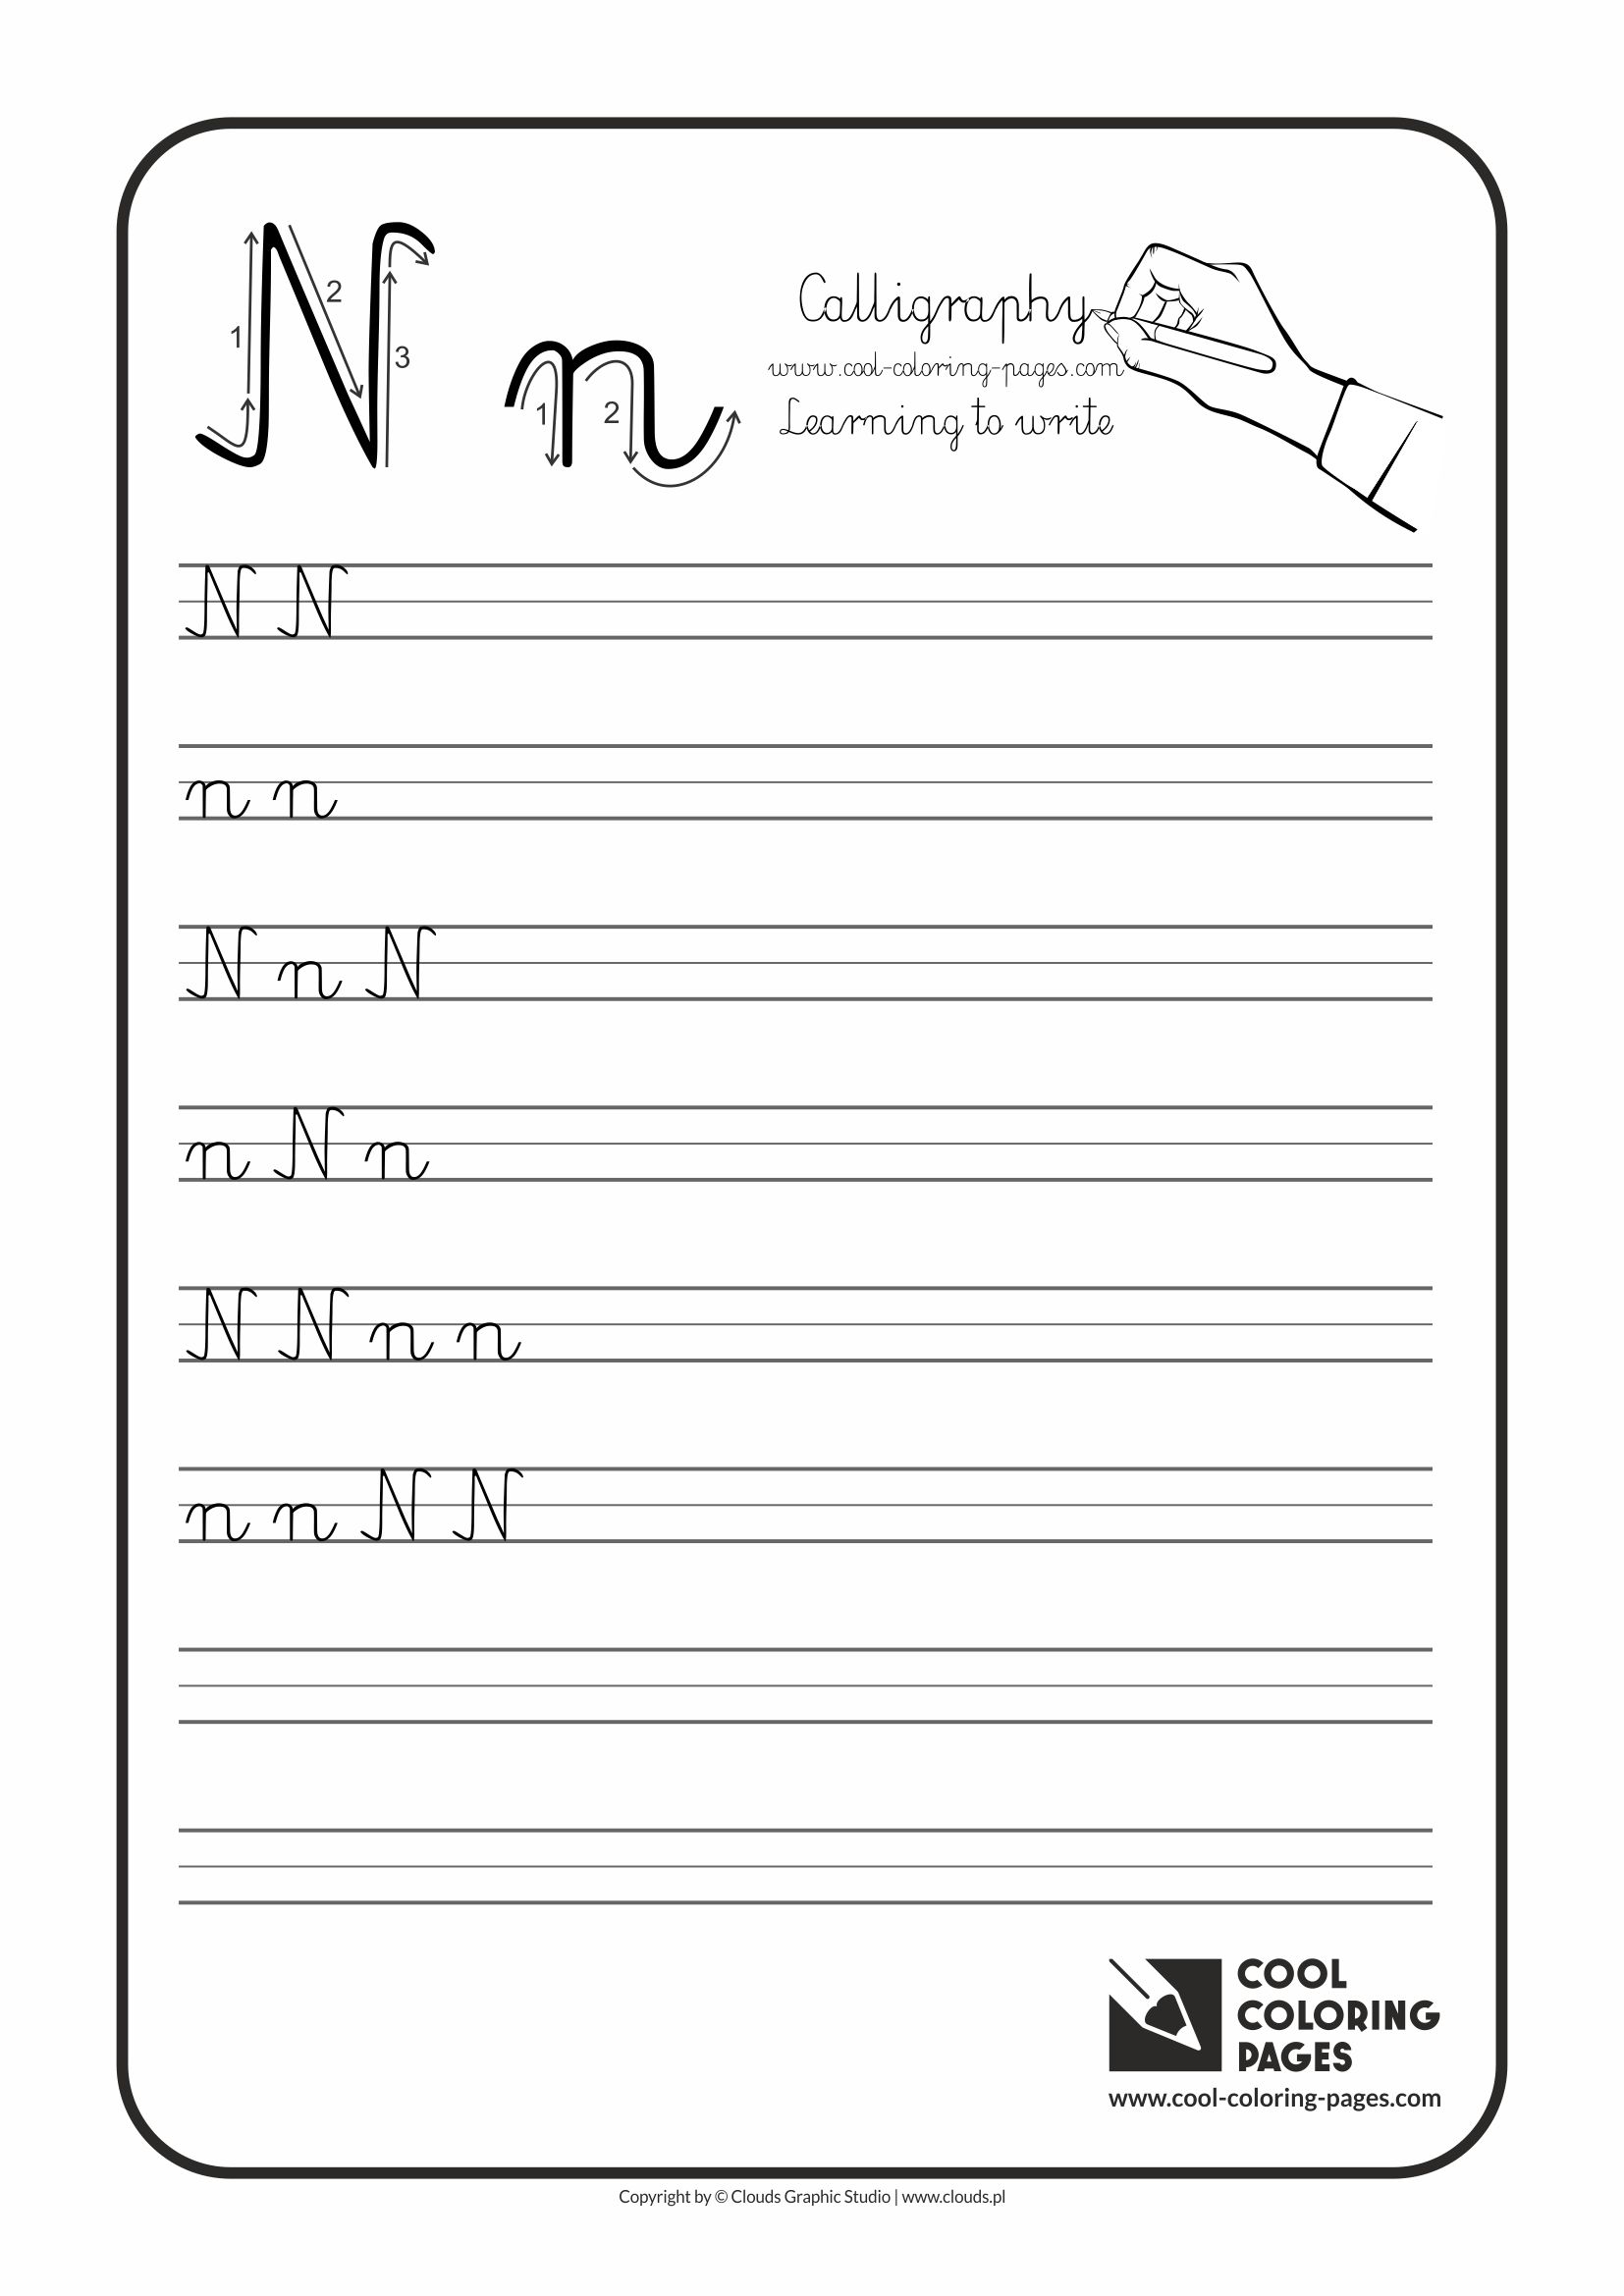 Cool Coloring Pages / Calligraphy / Letter N - Handwriting for kids / Worksheets